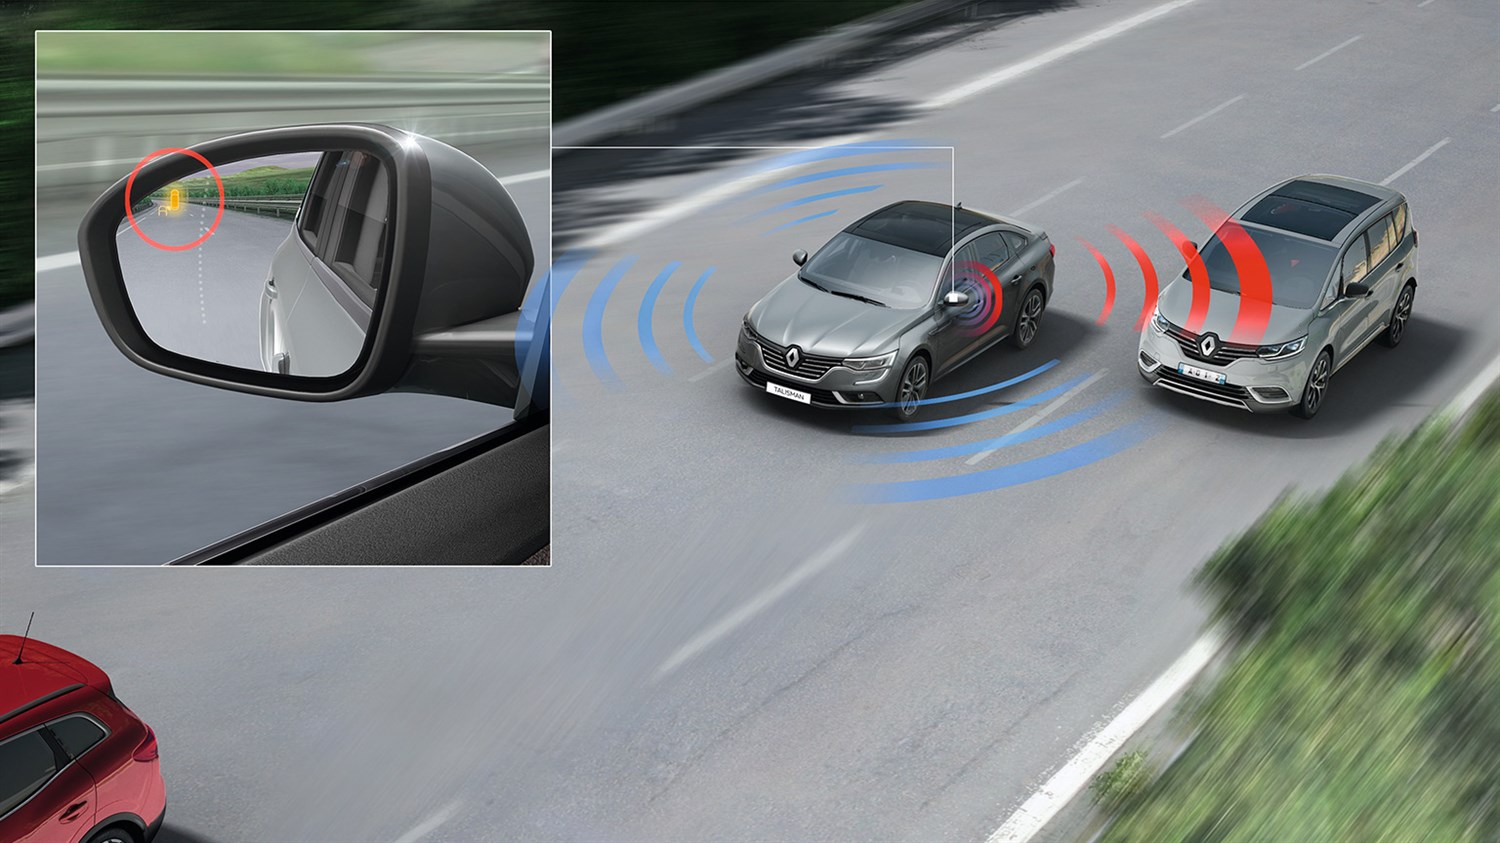 Renault TALISMAN advanced driver assistance systems warn and inform you in real time to maximise your safety.